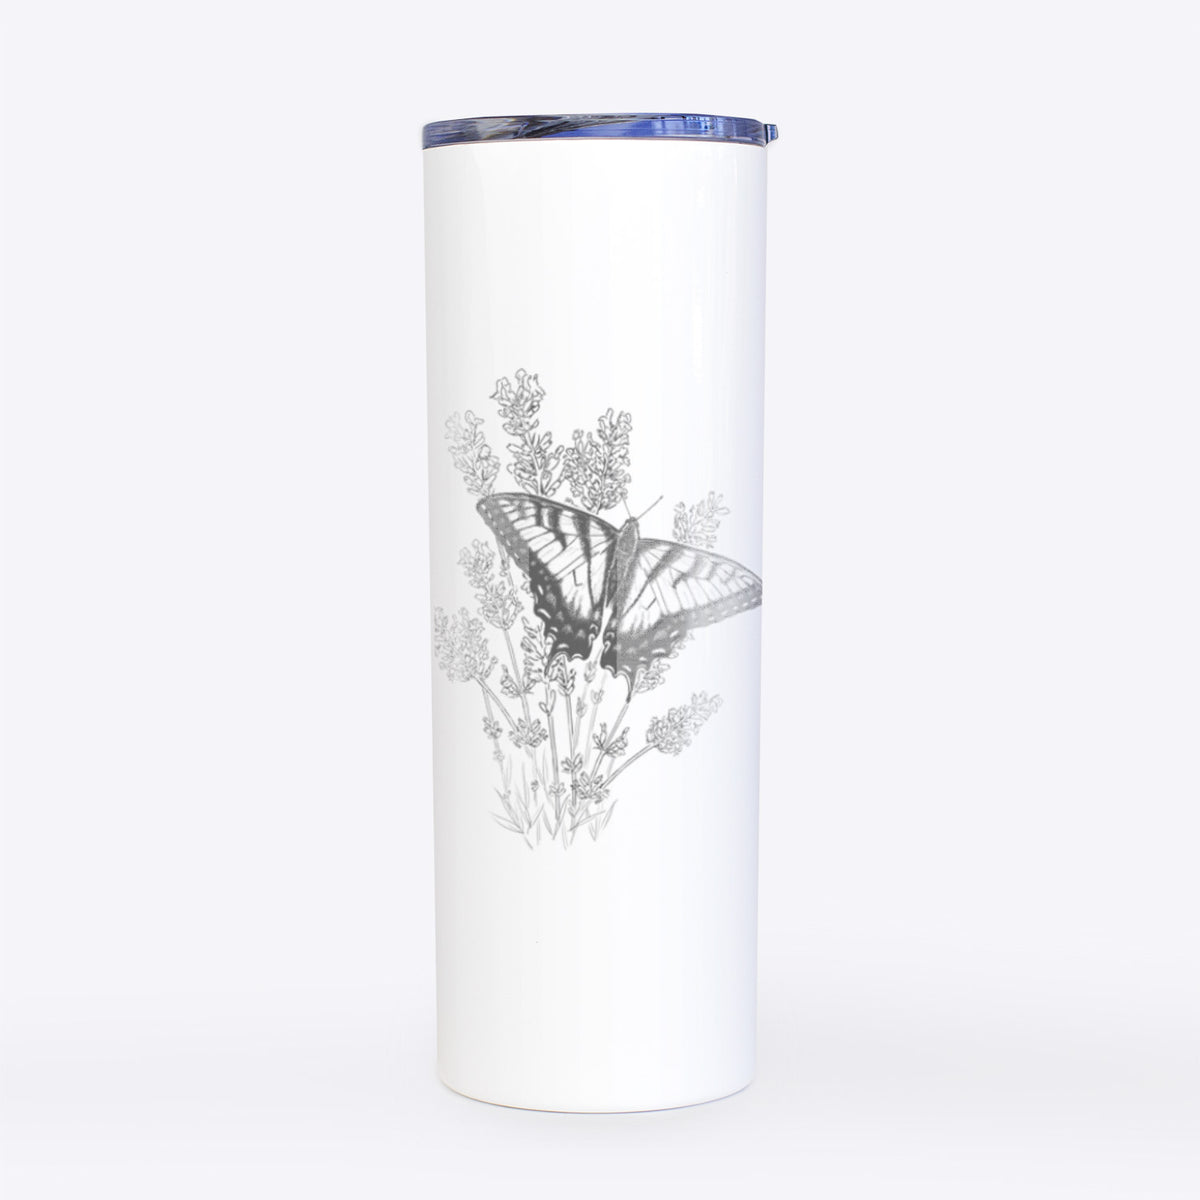 Eastern Tiger Swallowtail with Lavender - 20oz Skinny Tumbler